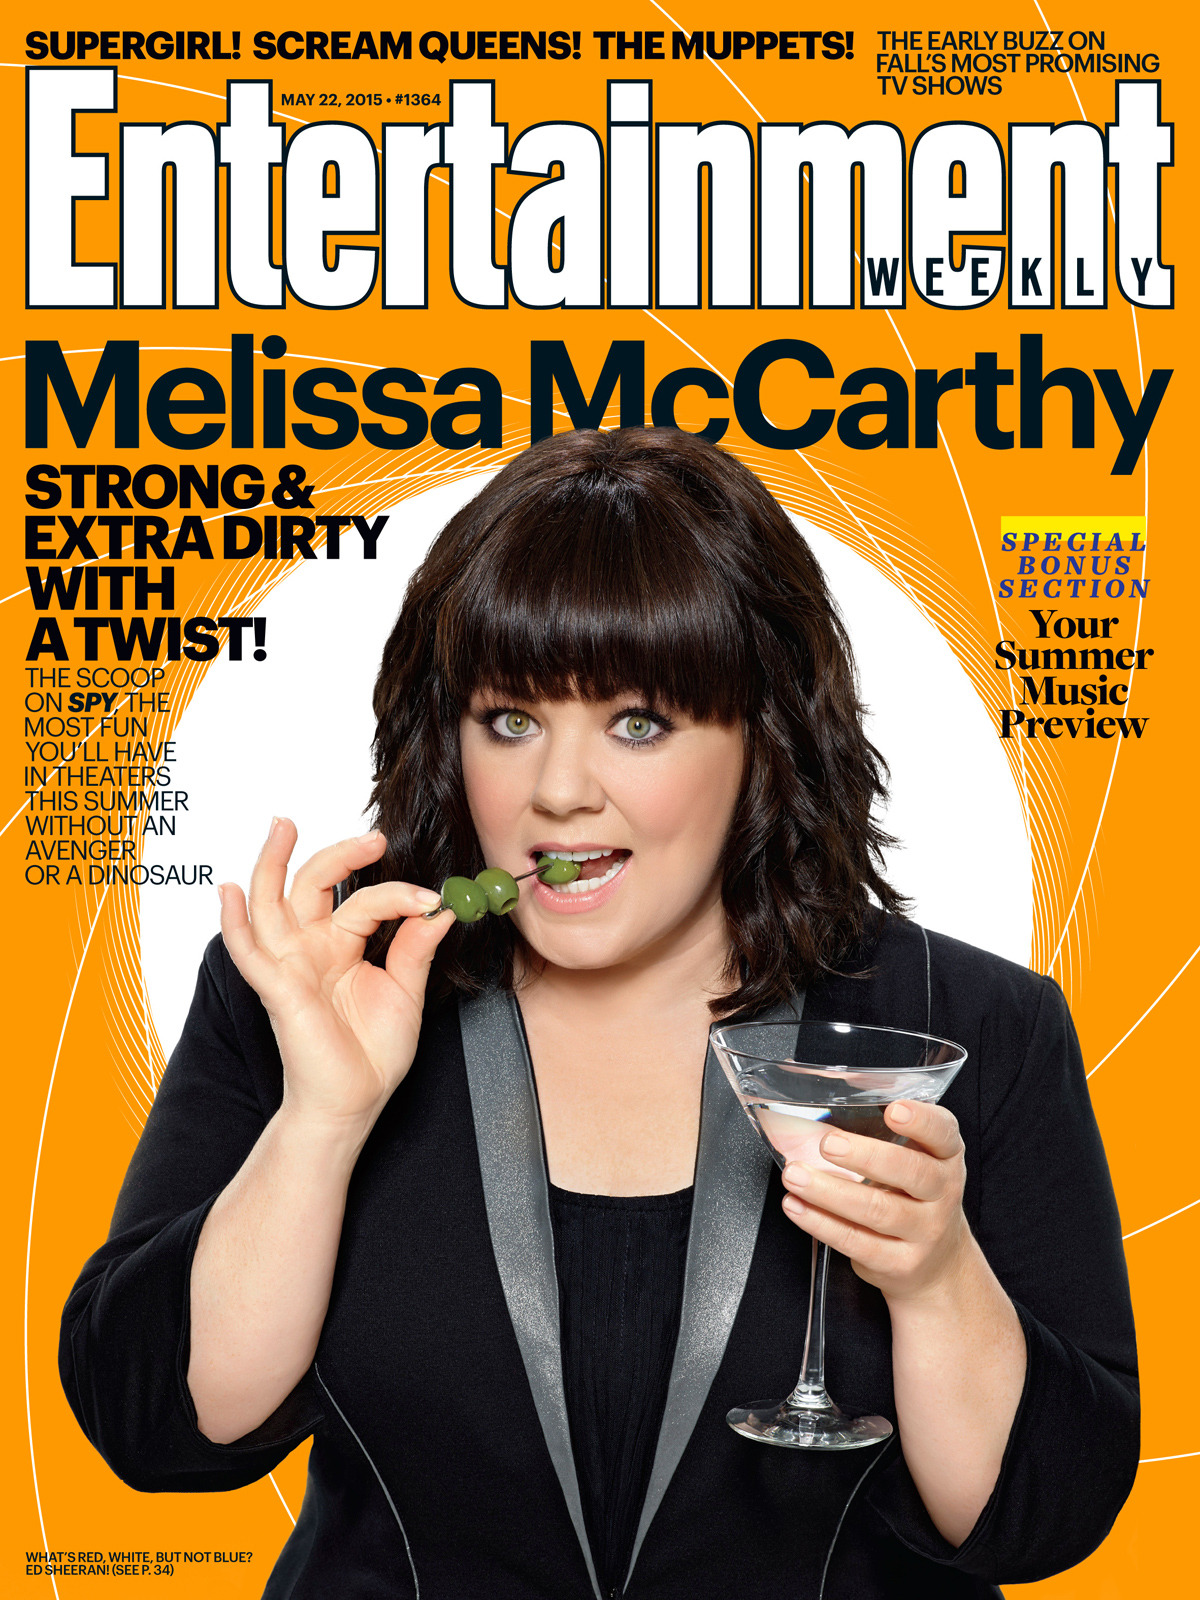 We have the strong (and extra dirty) scoop on Melissa McCarthy’s fun-filled summer flick, Spy.
Photo credit: Mary Ellen Matthews/Fox